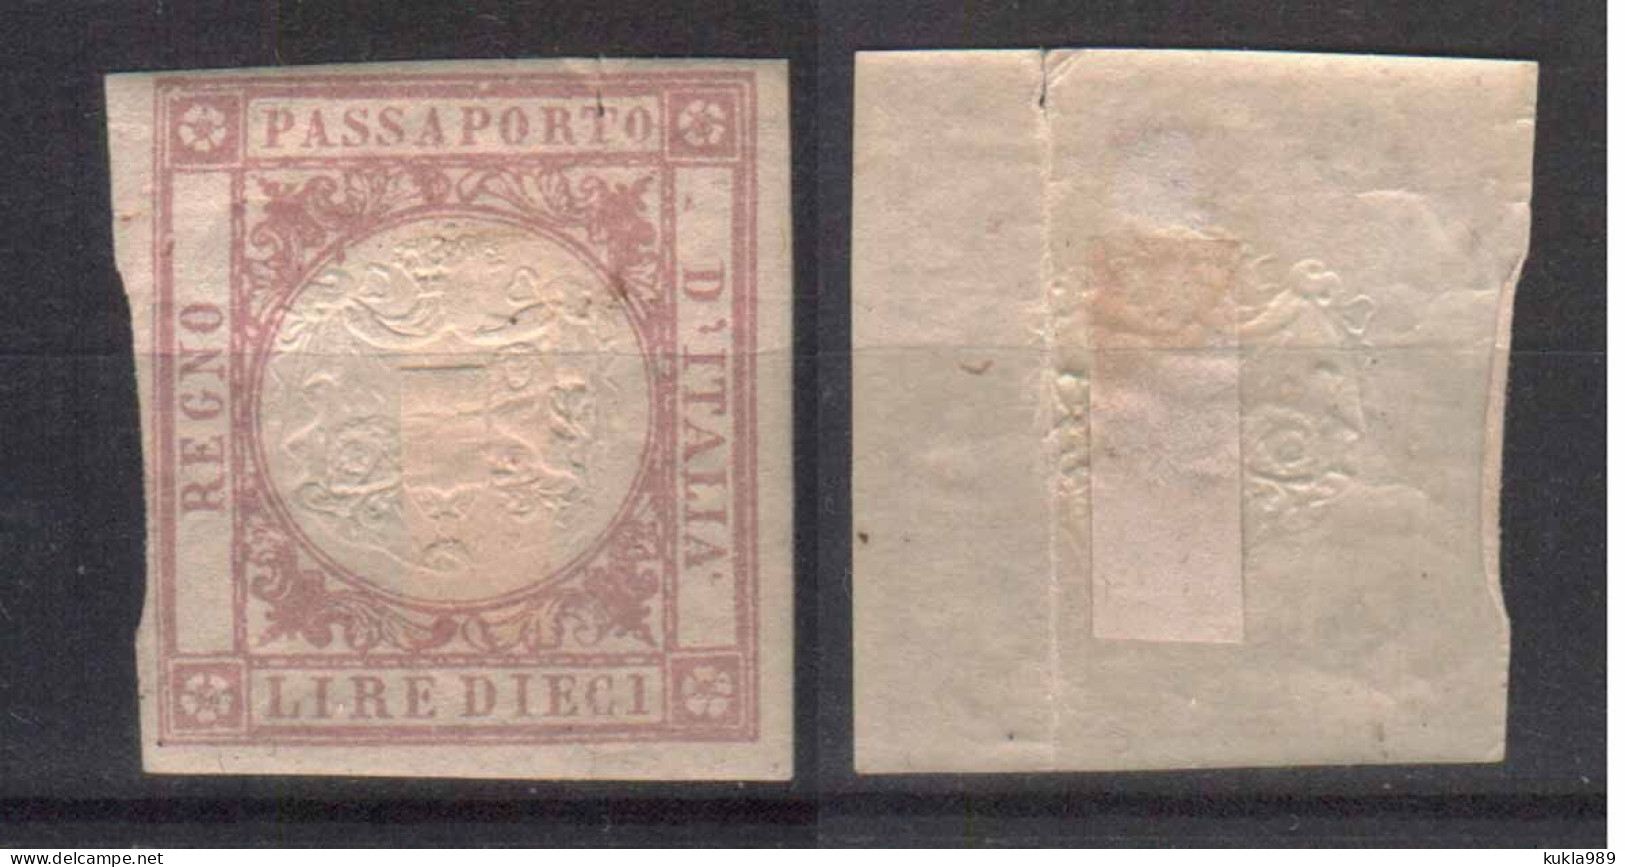 KINGDOM ITALY   FISCAL REVENUE TAX PASSPORT  STAMP  C. 1860s, MH - Fiscale Zegels